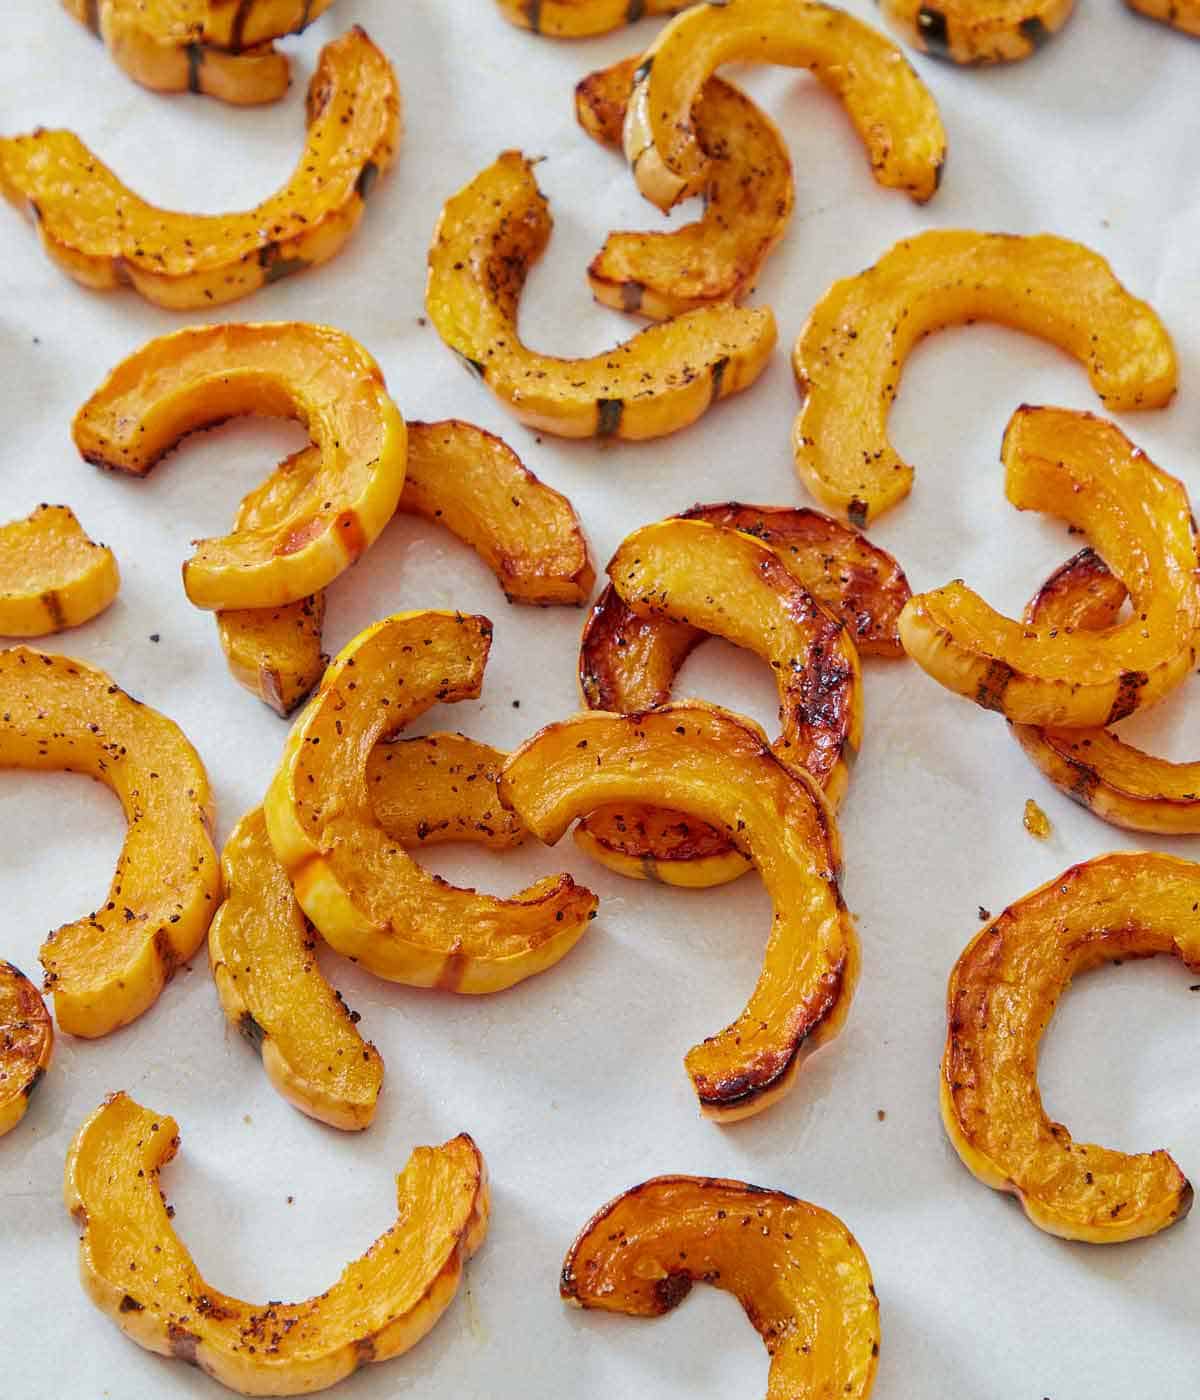 Roasted delicata squash on a white surface.